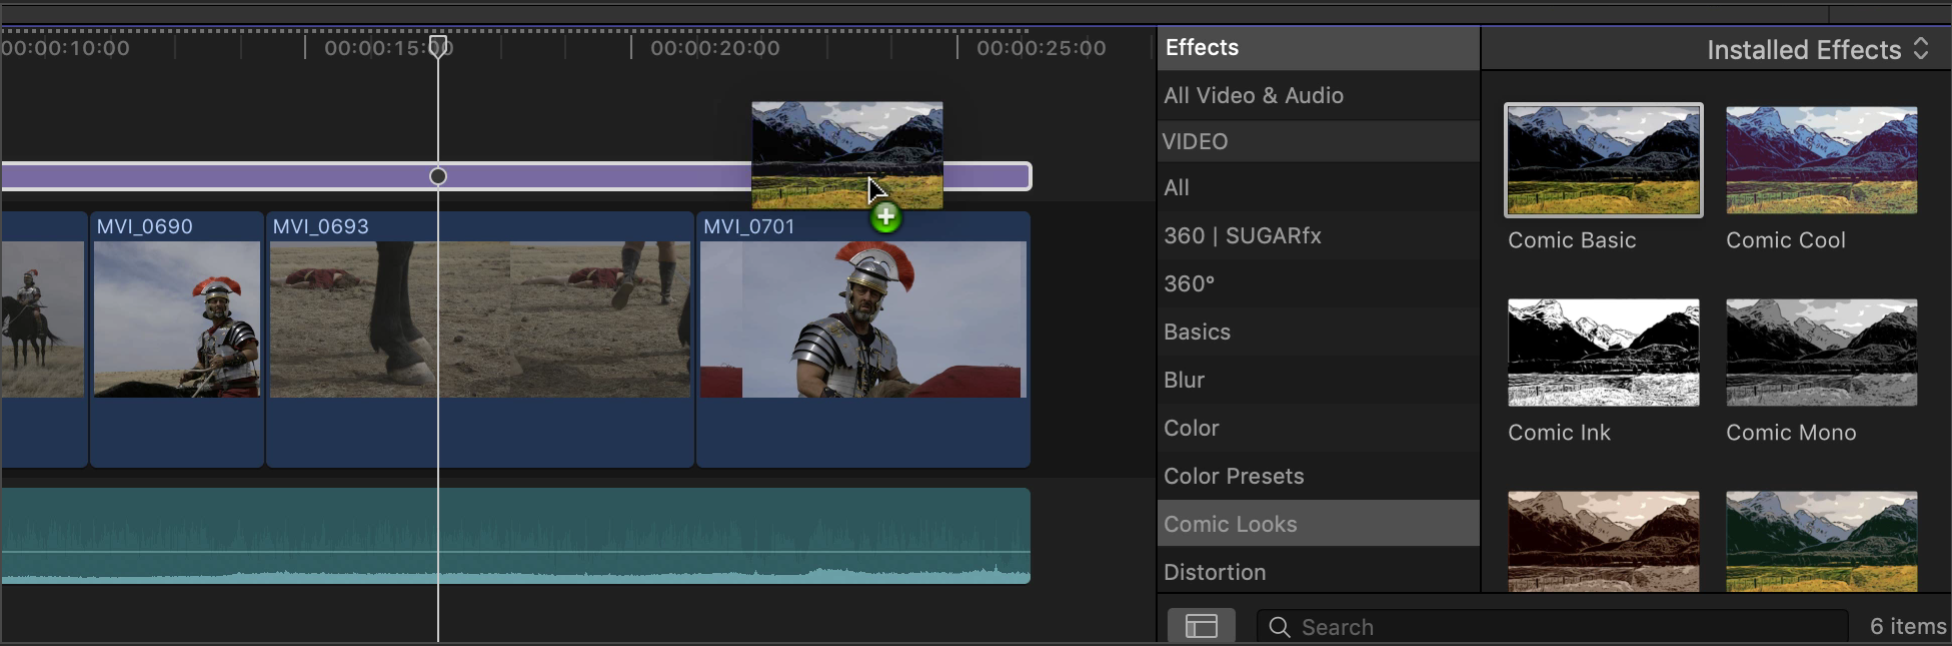 FREE Adjustment layer for Final Cut Pro (Plus How to use it!)